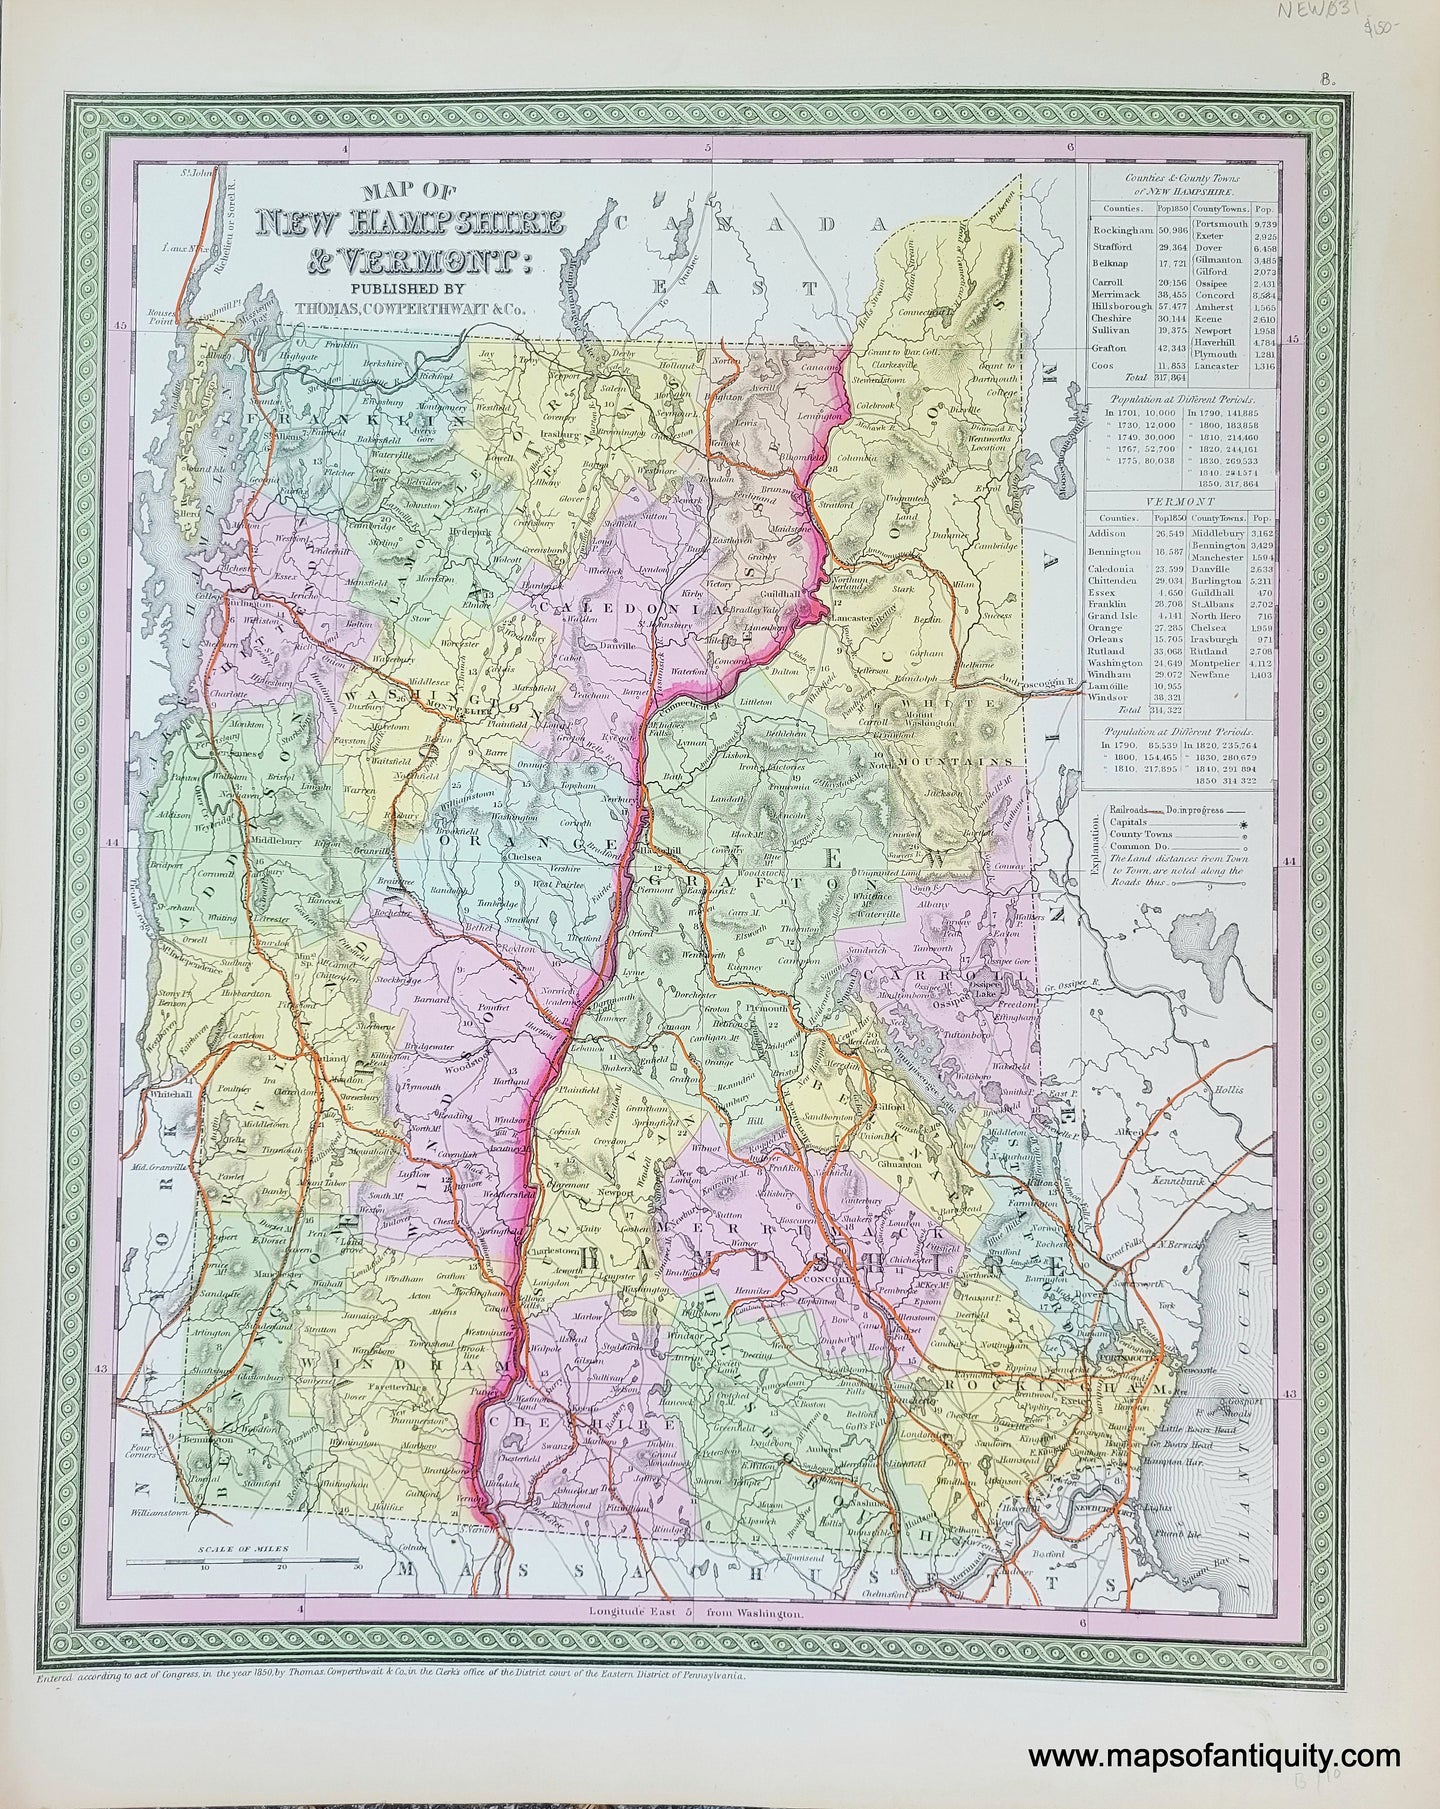 Antique-Hand-Colored-Map-Map-of-New-Hampshire-and-Vermont.-United-States-Northeast-1850-Mitchell/Cowperthwait-Desilver-&-Butler-Maps-Of-Antiquity